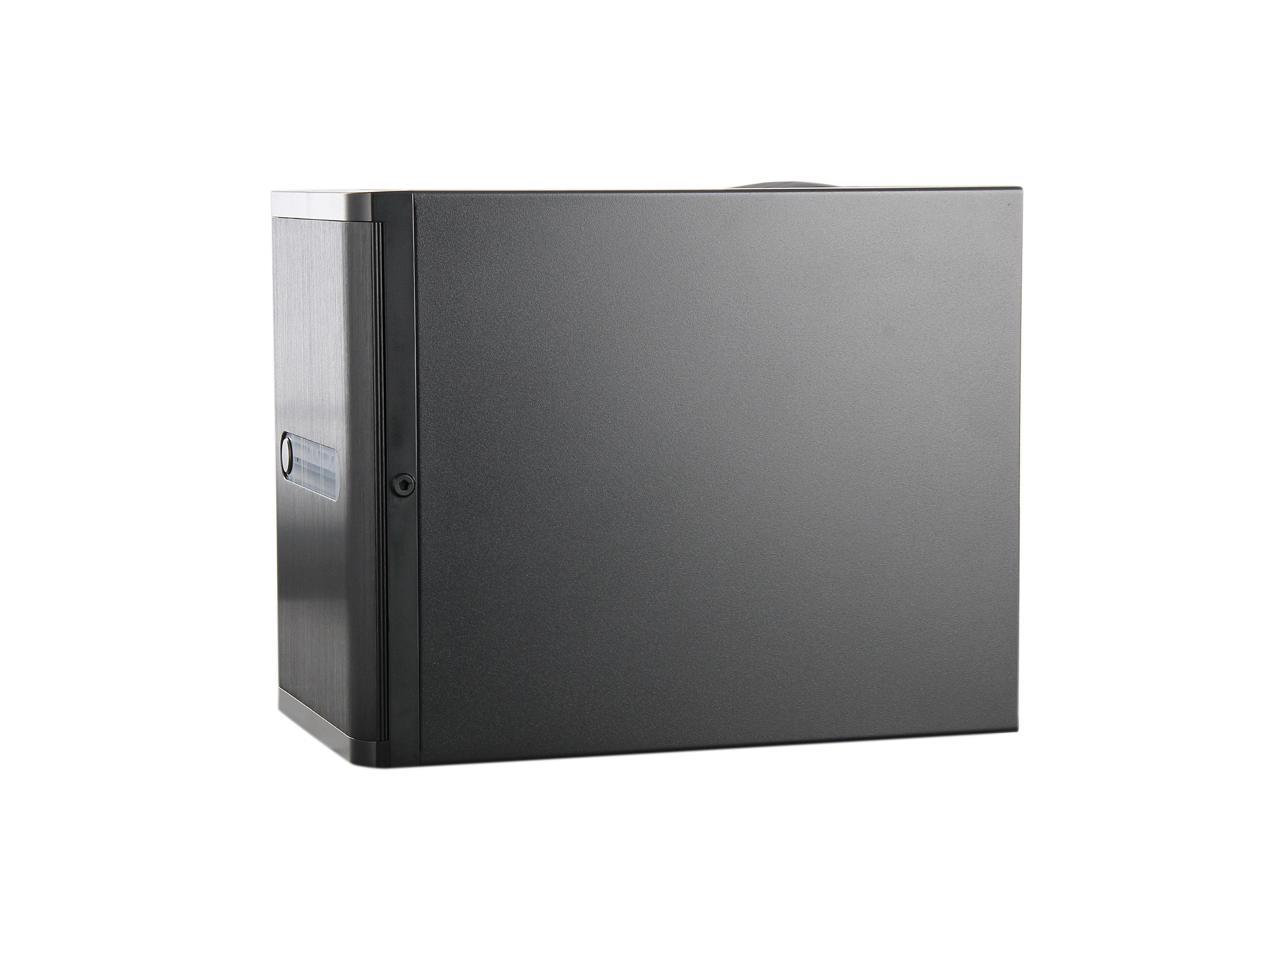 SilverStone DS380B Black Premium 8-bay Small Form Factor NAS Chassis